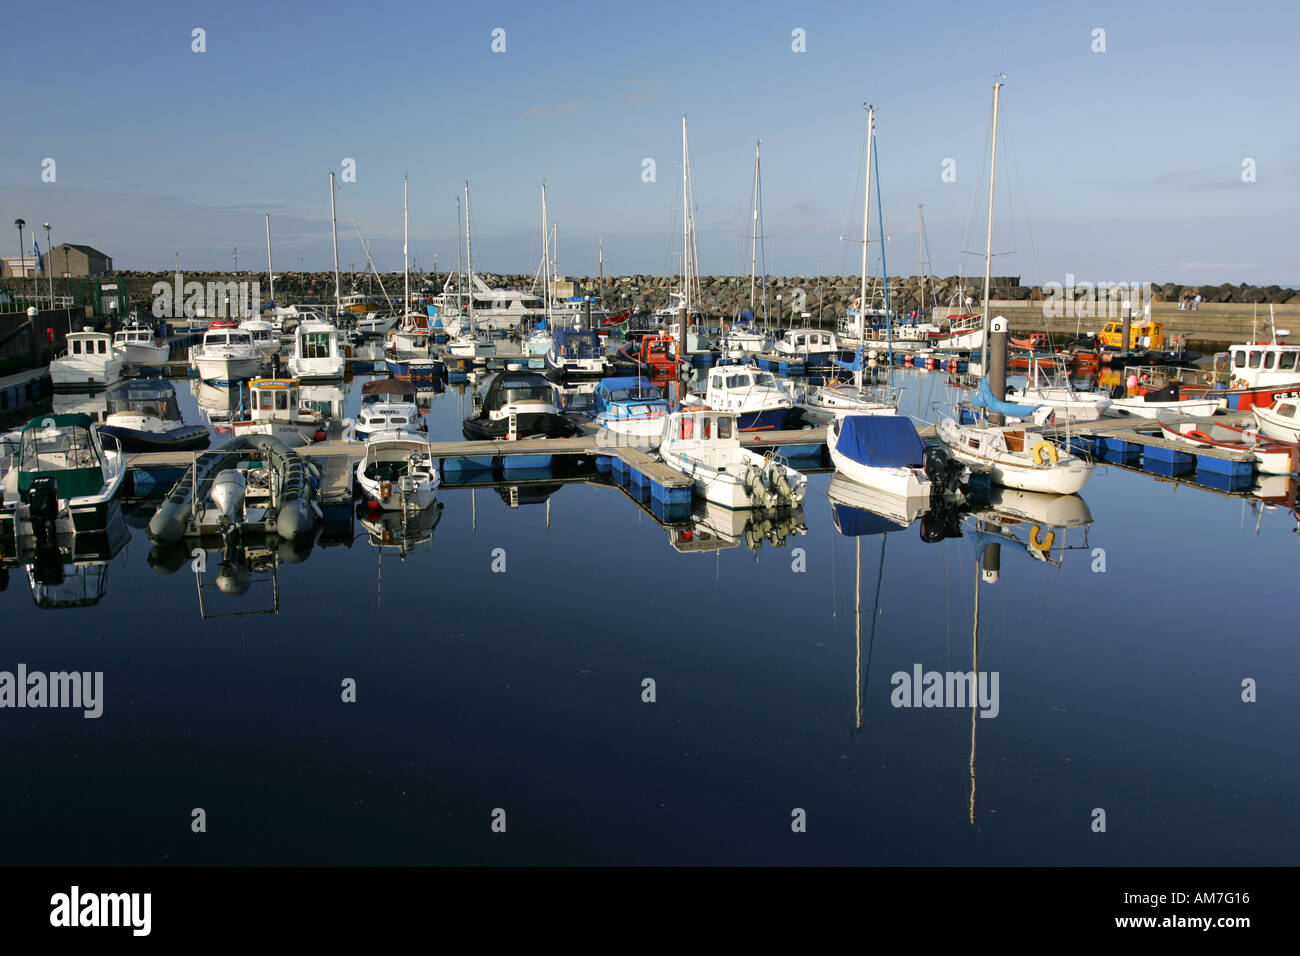 Boats moored in Ballycastle Harbour reflect in the still inner harbour water, County Antrim North coast Northern Ireland NI GB Stock Photo